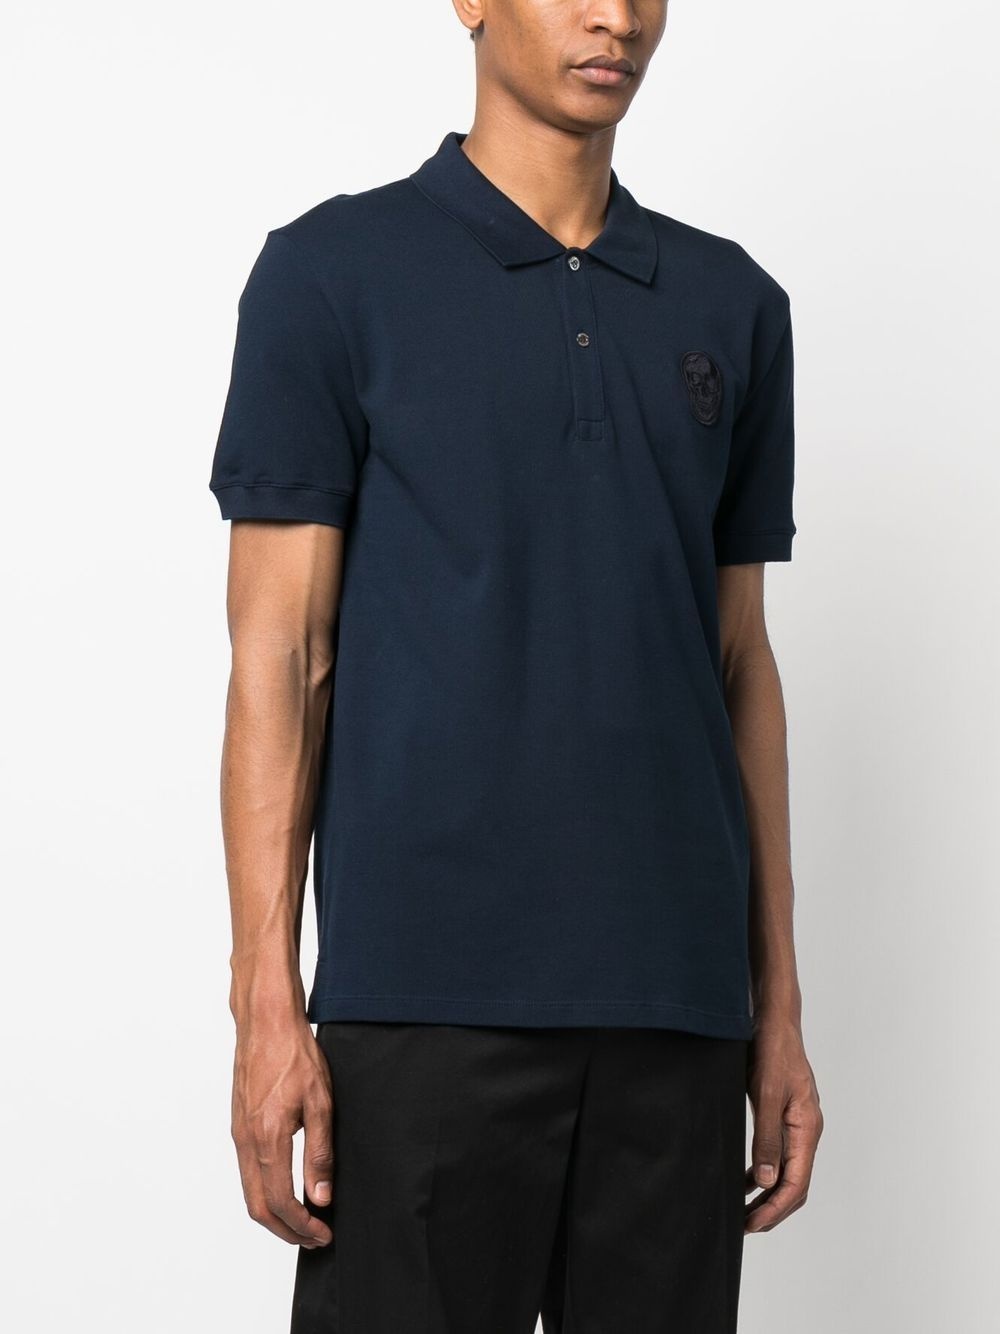 skull-patch polo shirt - 3